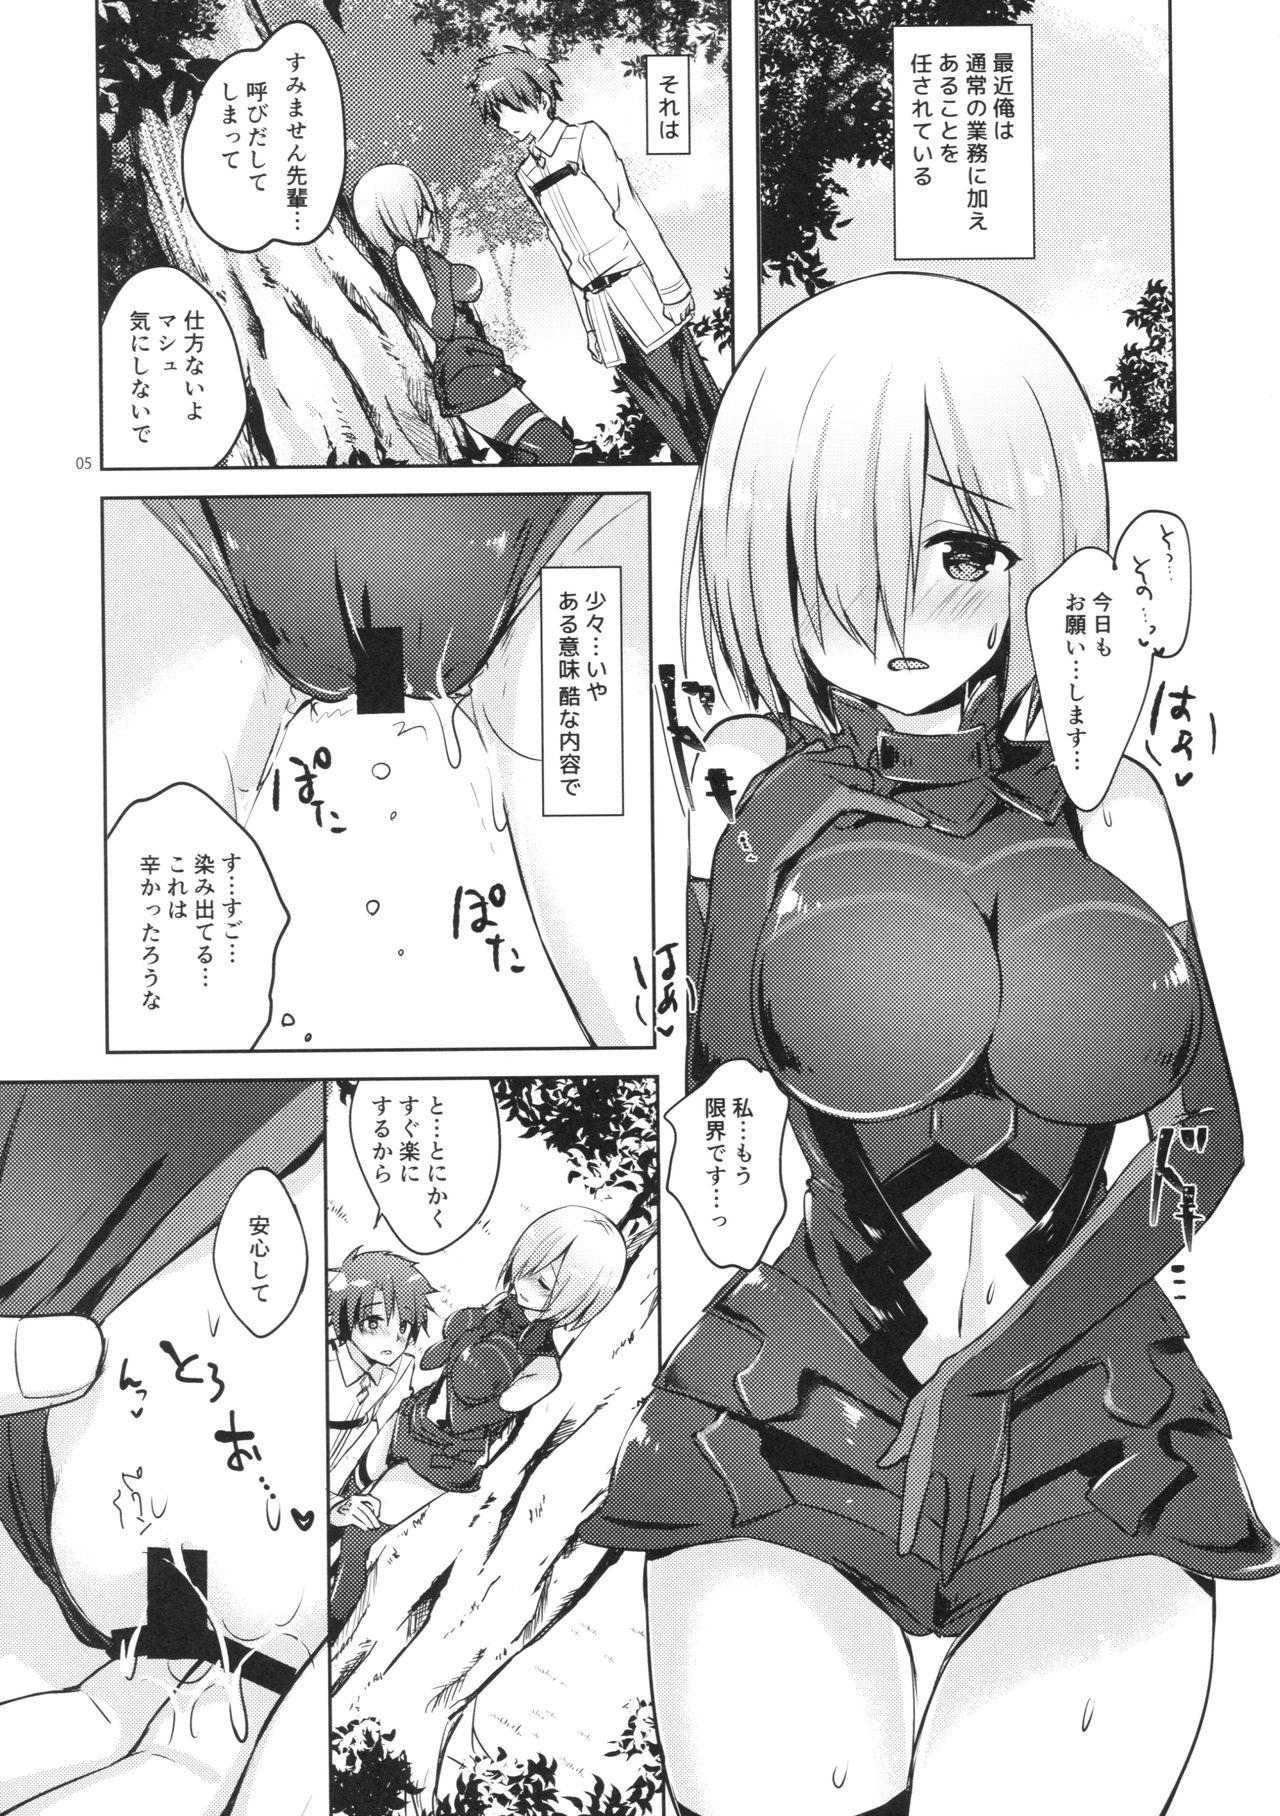 Public Nudity Mash/Hatsujou Order - Fate grand order Youth Porn - Page 4